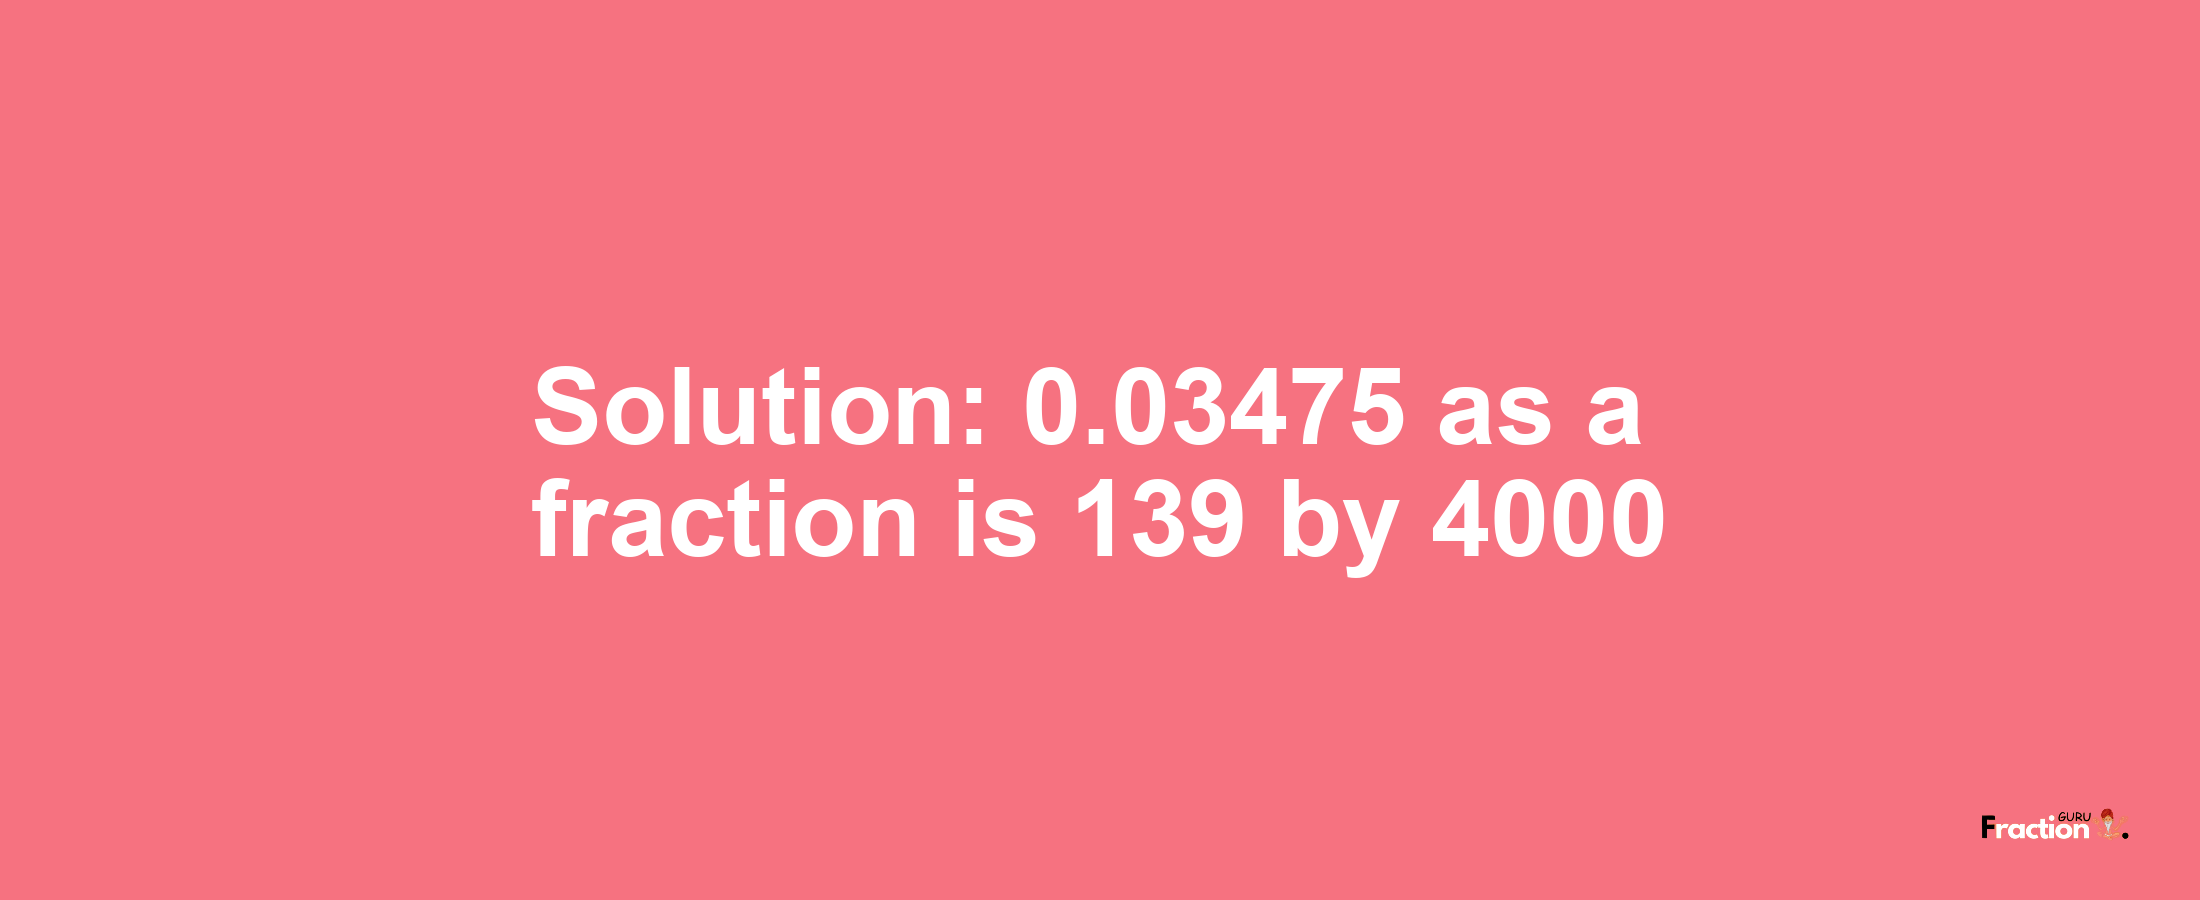 Solution:0.03475 as a fraction is 139/4000